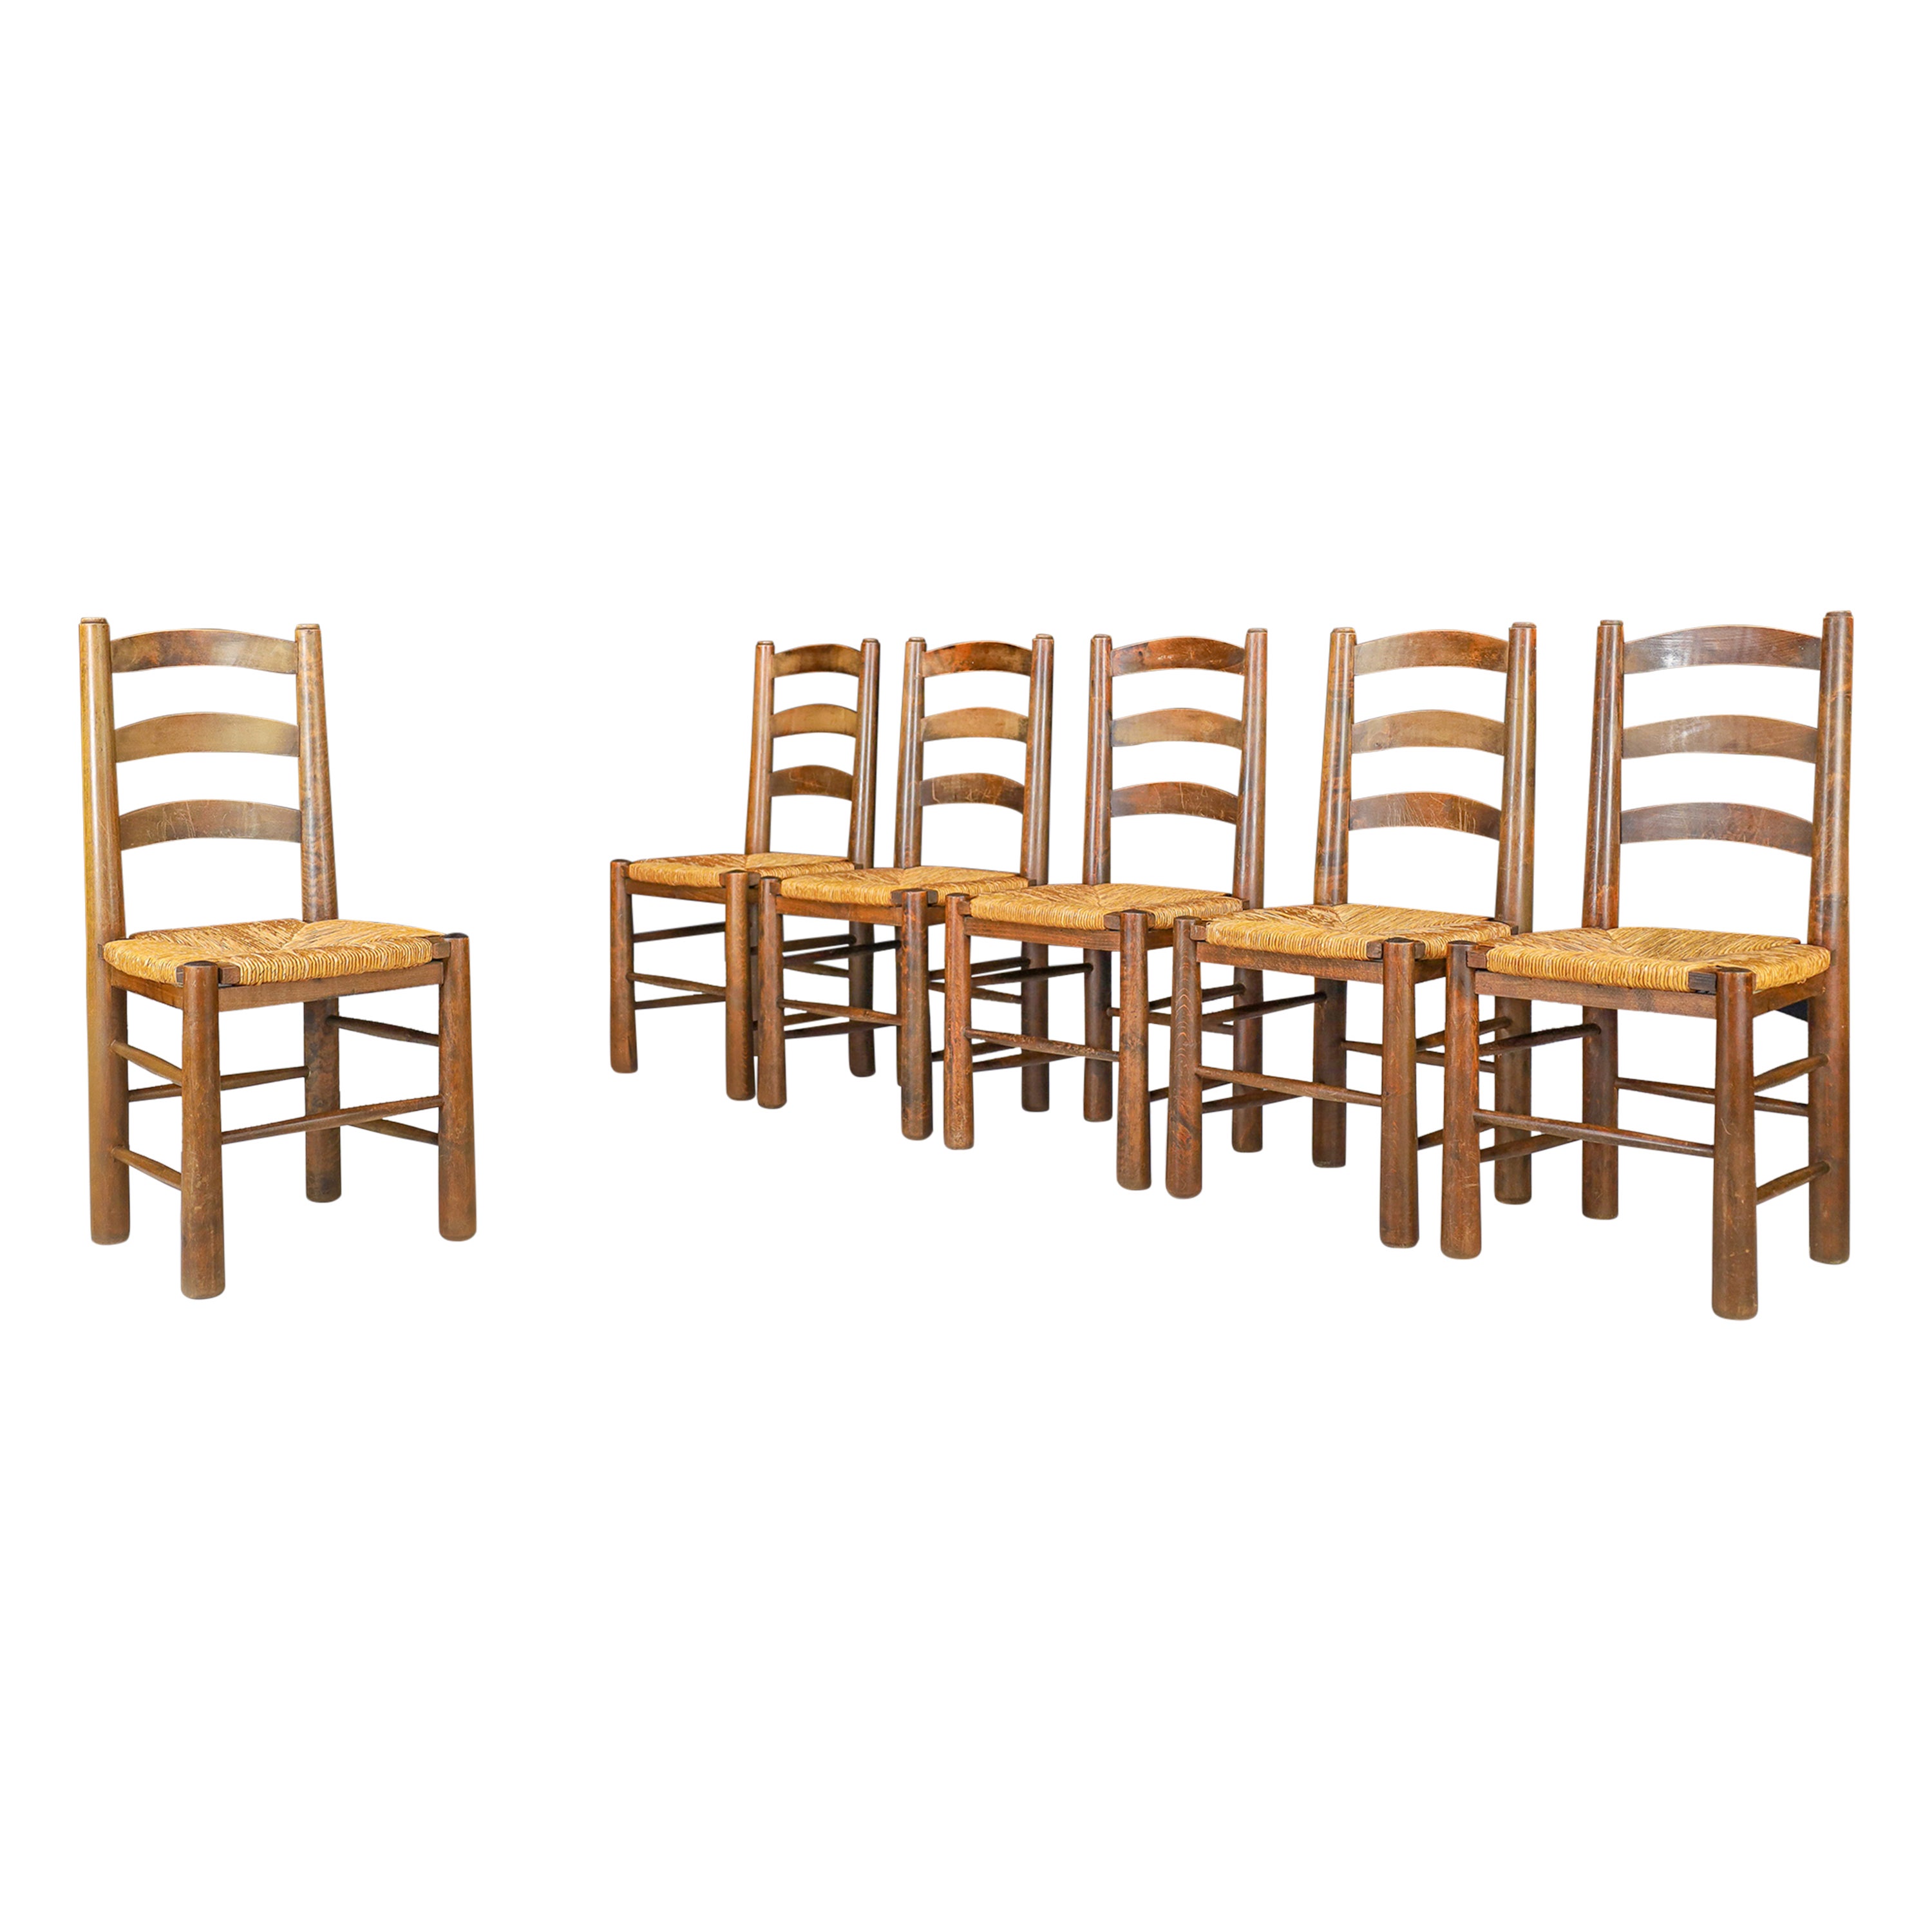 Georges Robert Dining Chairs in Oak and Rush, France, 1950s For Sale